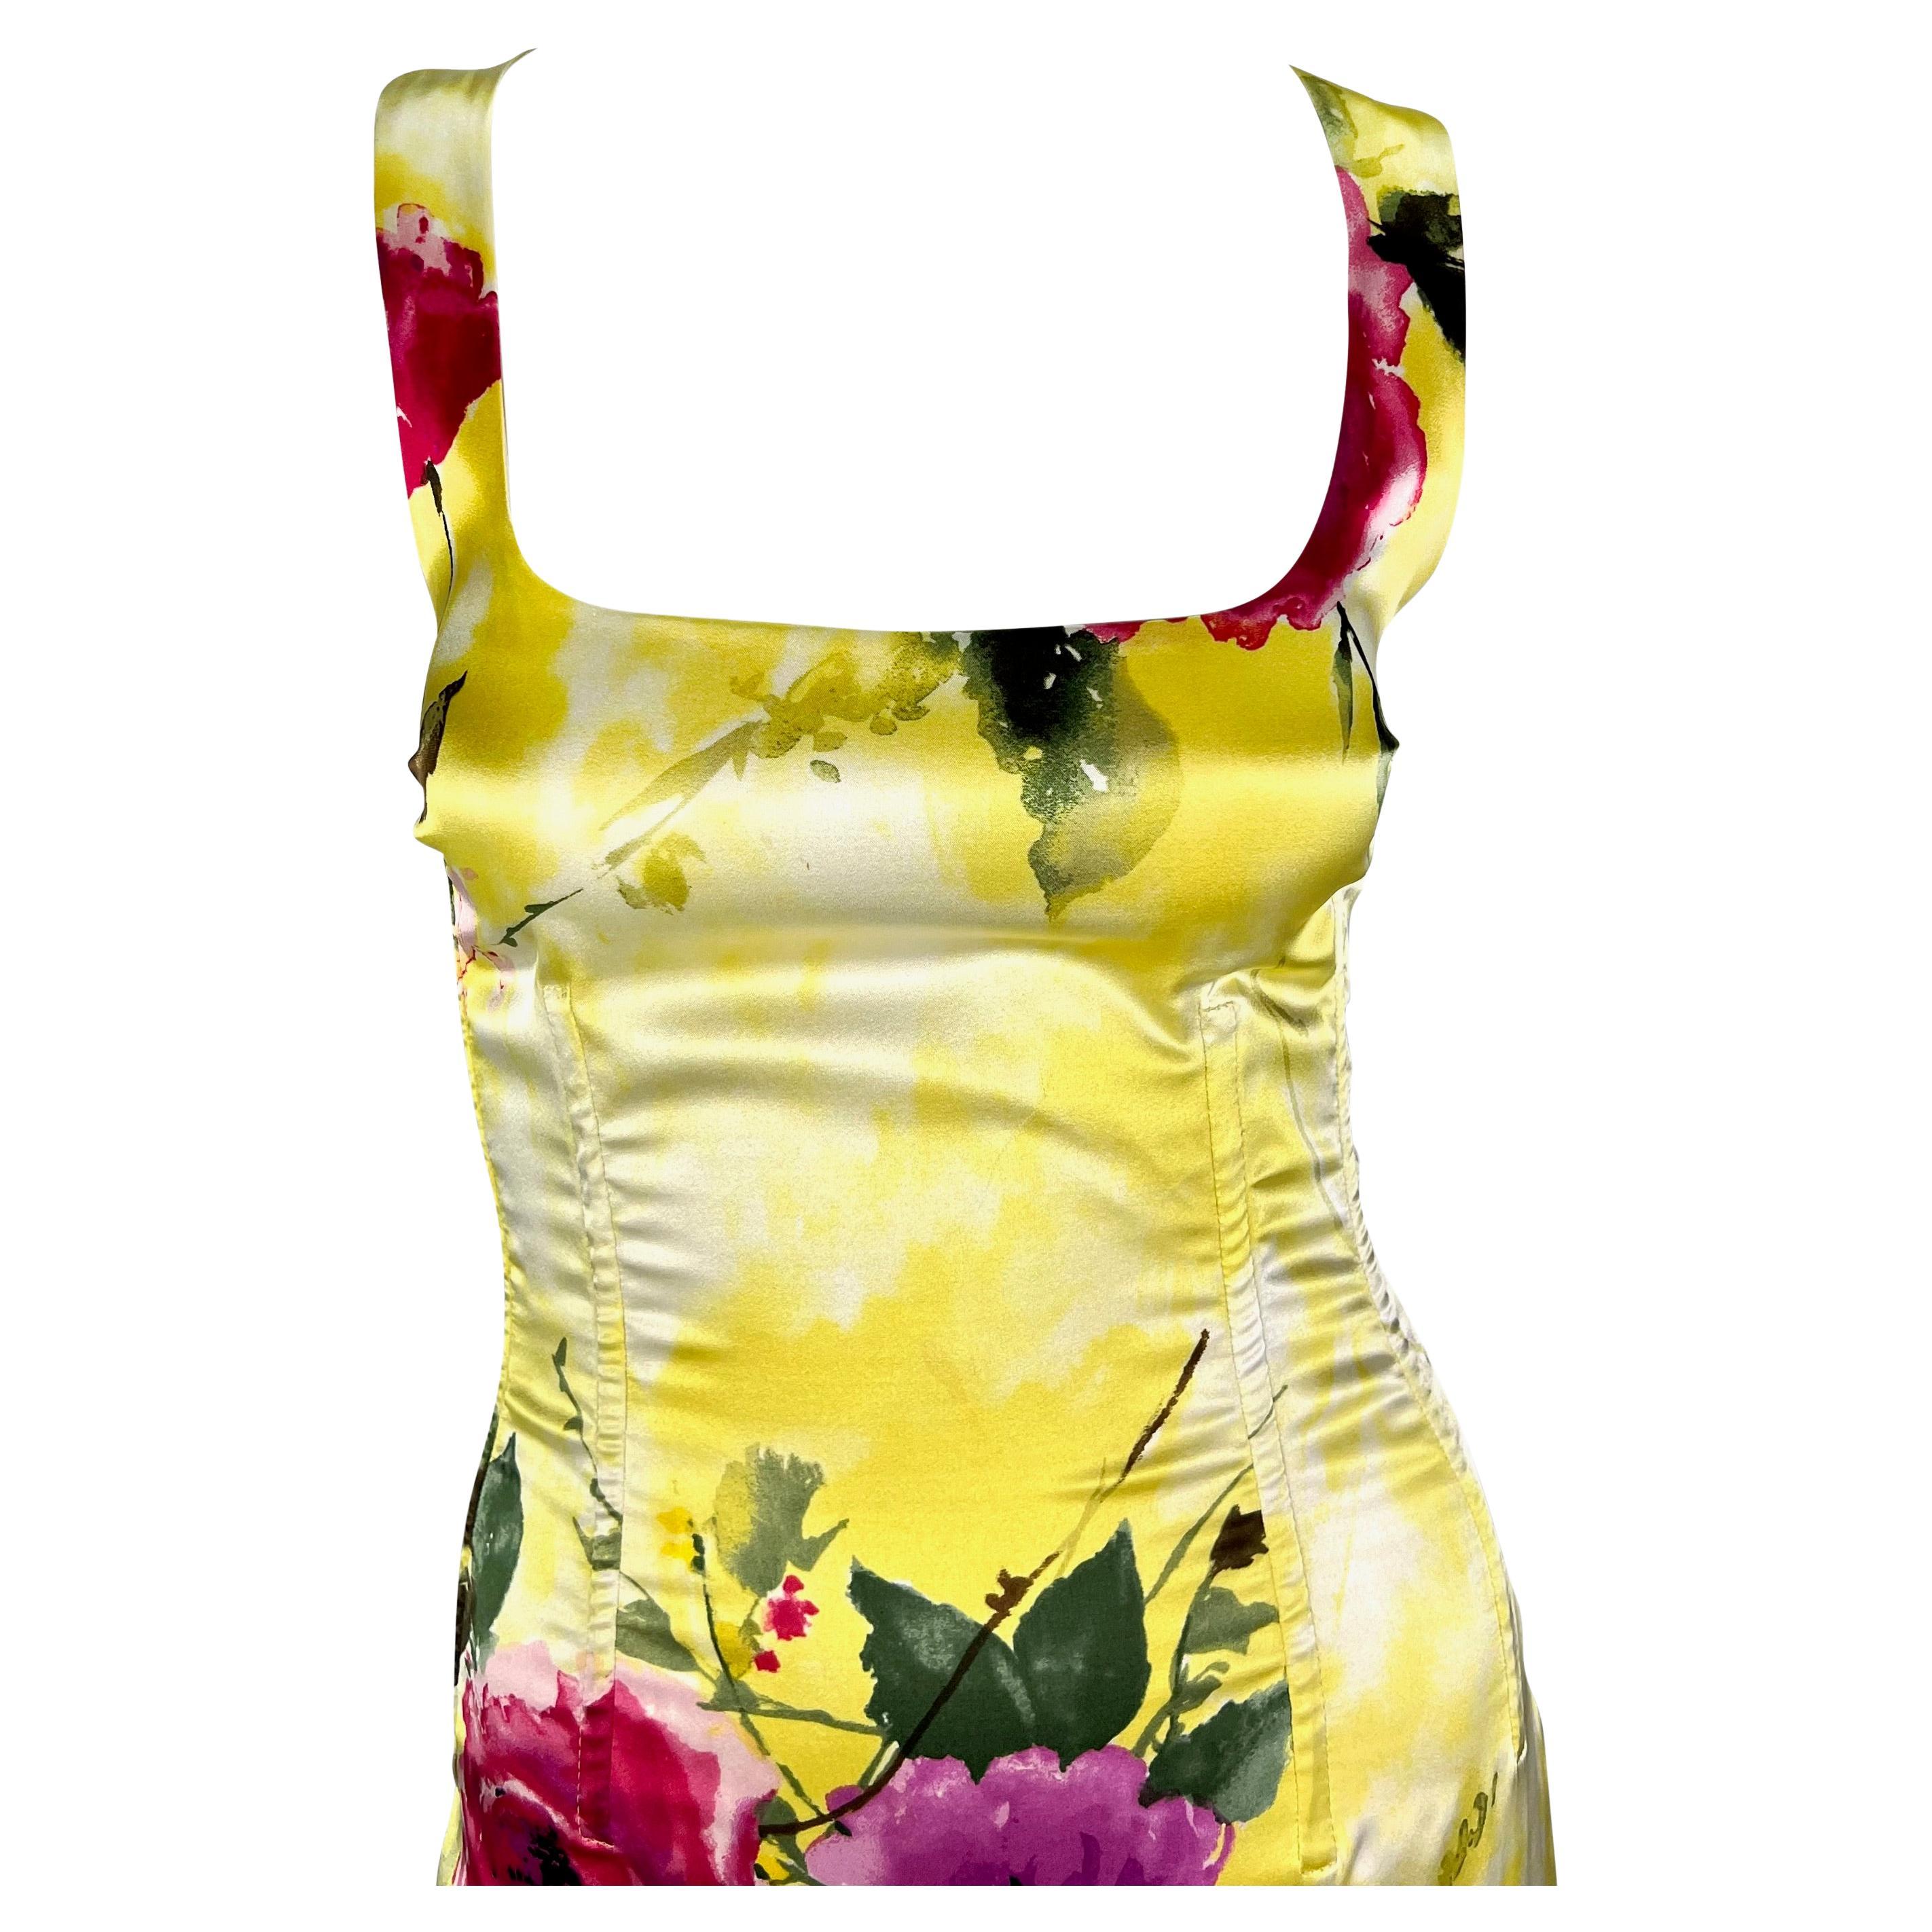 This stunning pastel yellow Dolce & Gabbana floral gown is covered in a beautiful pink floral print. This form-fitting satin dress features a square neckline, slit at the back and is made complete with corset boning.  The structured waist lends to a